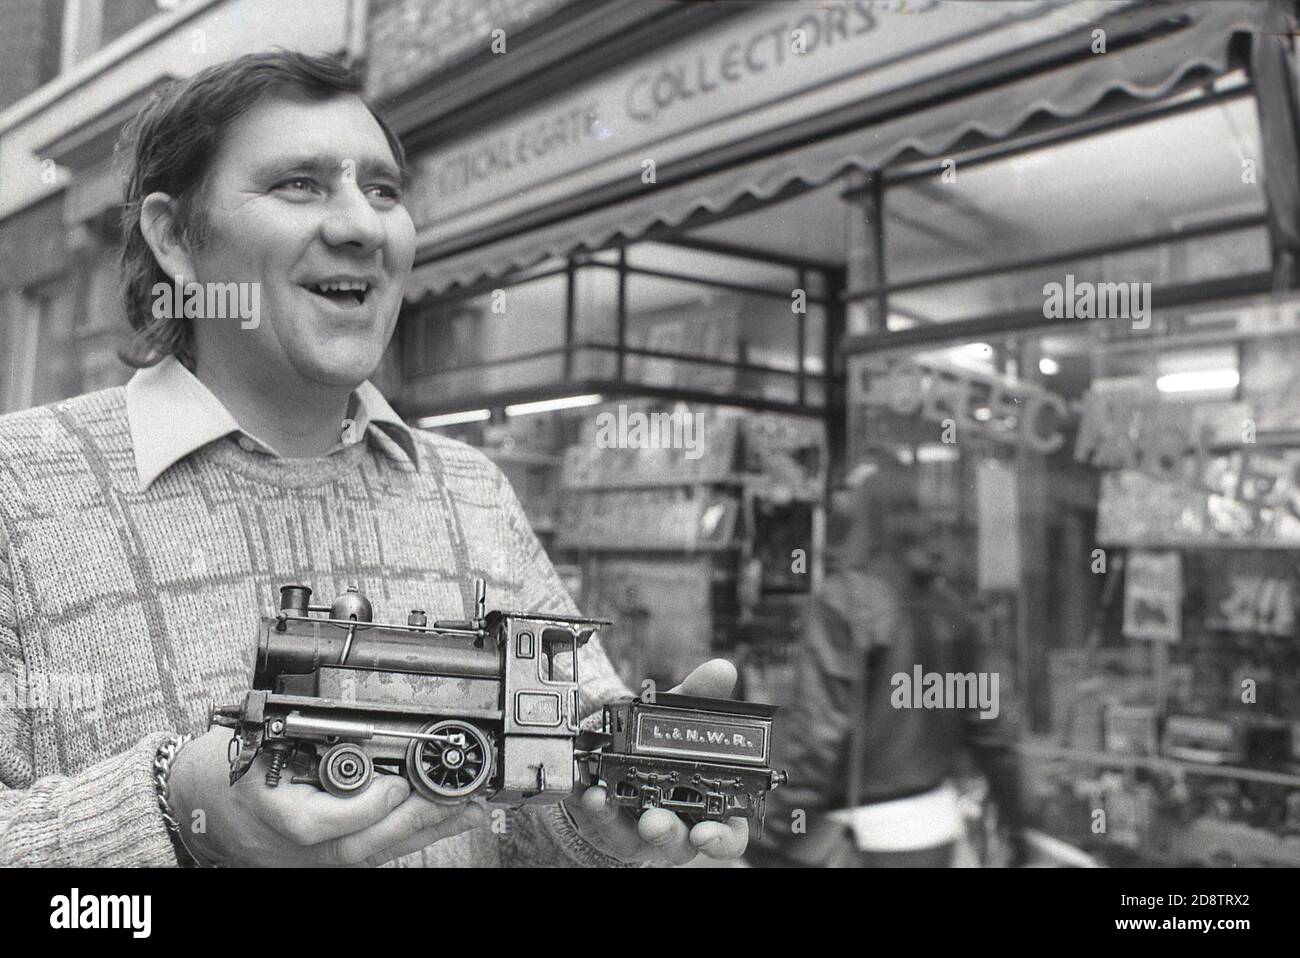 1980s, historical, outside a model train and collectors shop in Micklegate Street, York, England, UK, a man proudly holding a model of an L & N W R steam locomotive and wagon. Model railways are a popular hobby and those who collect model trains are known as rail enthusiasts. The Englsih city of York is home to the National Railway Museum, where world-changing inventions such as the Rocket and the Mallard, the world's fastest steam locomotive, are located. Stock Photo